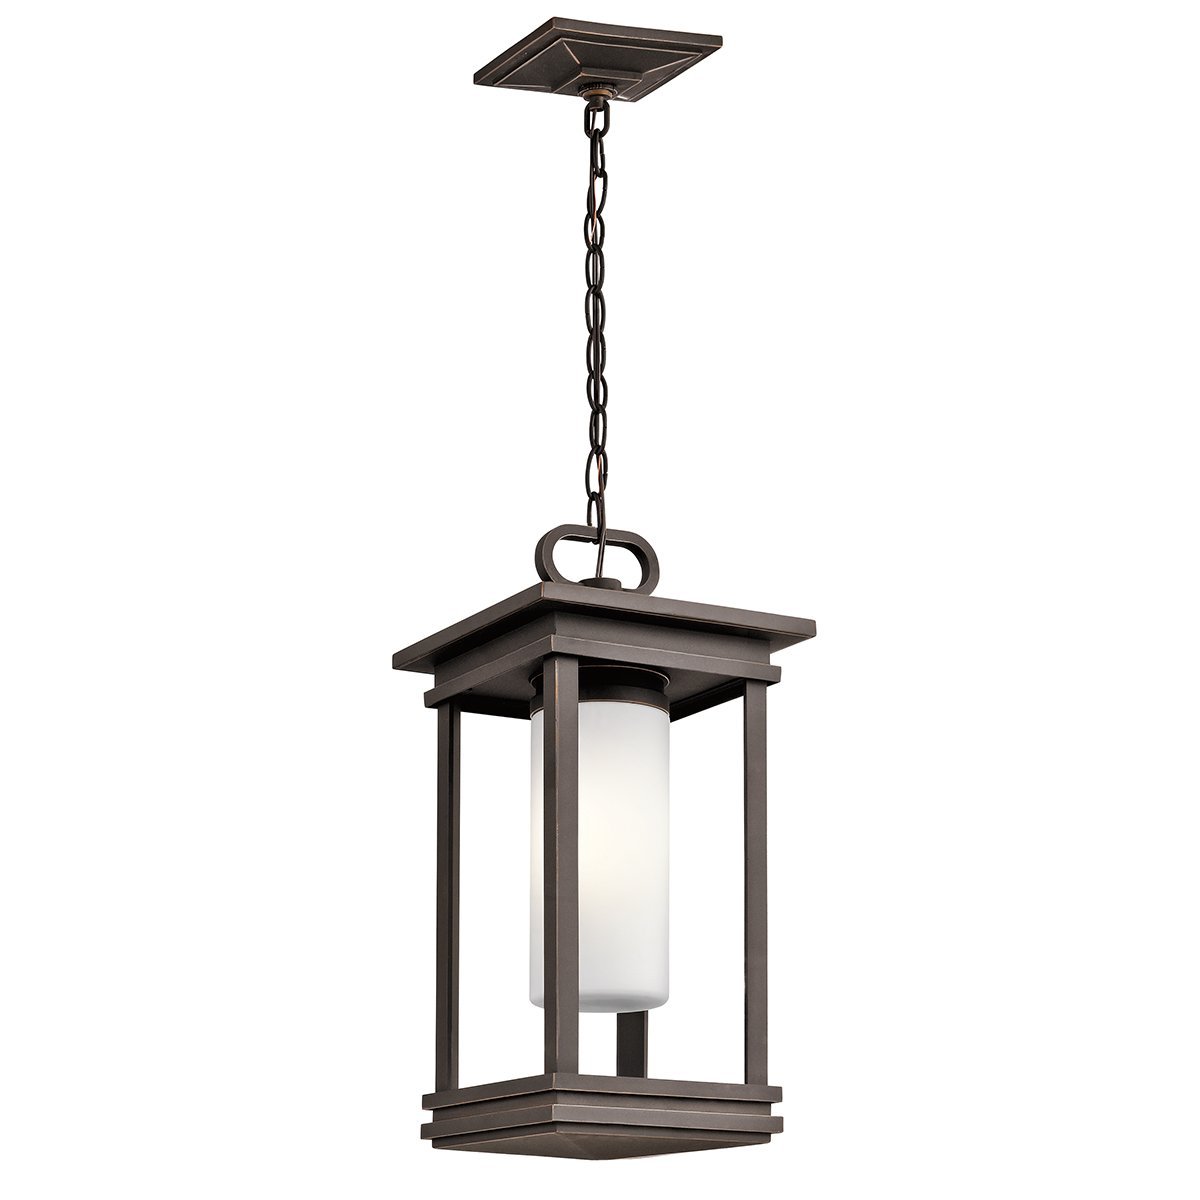 South Hope One Light Rubbed Bronze Small Chain Lantern